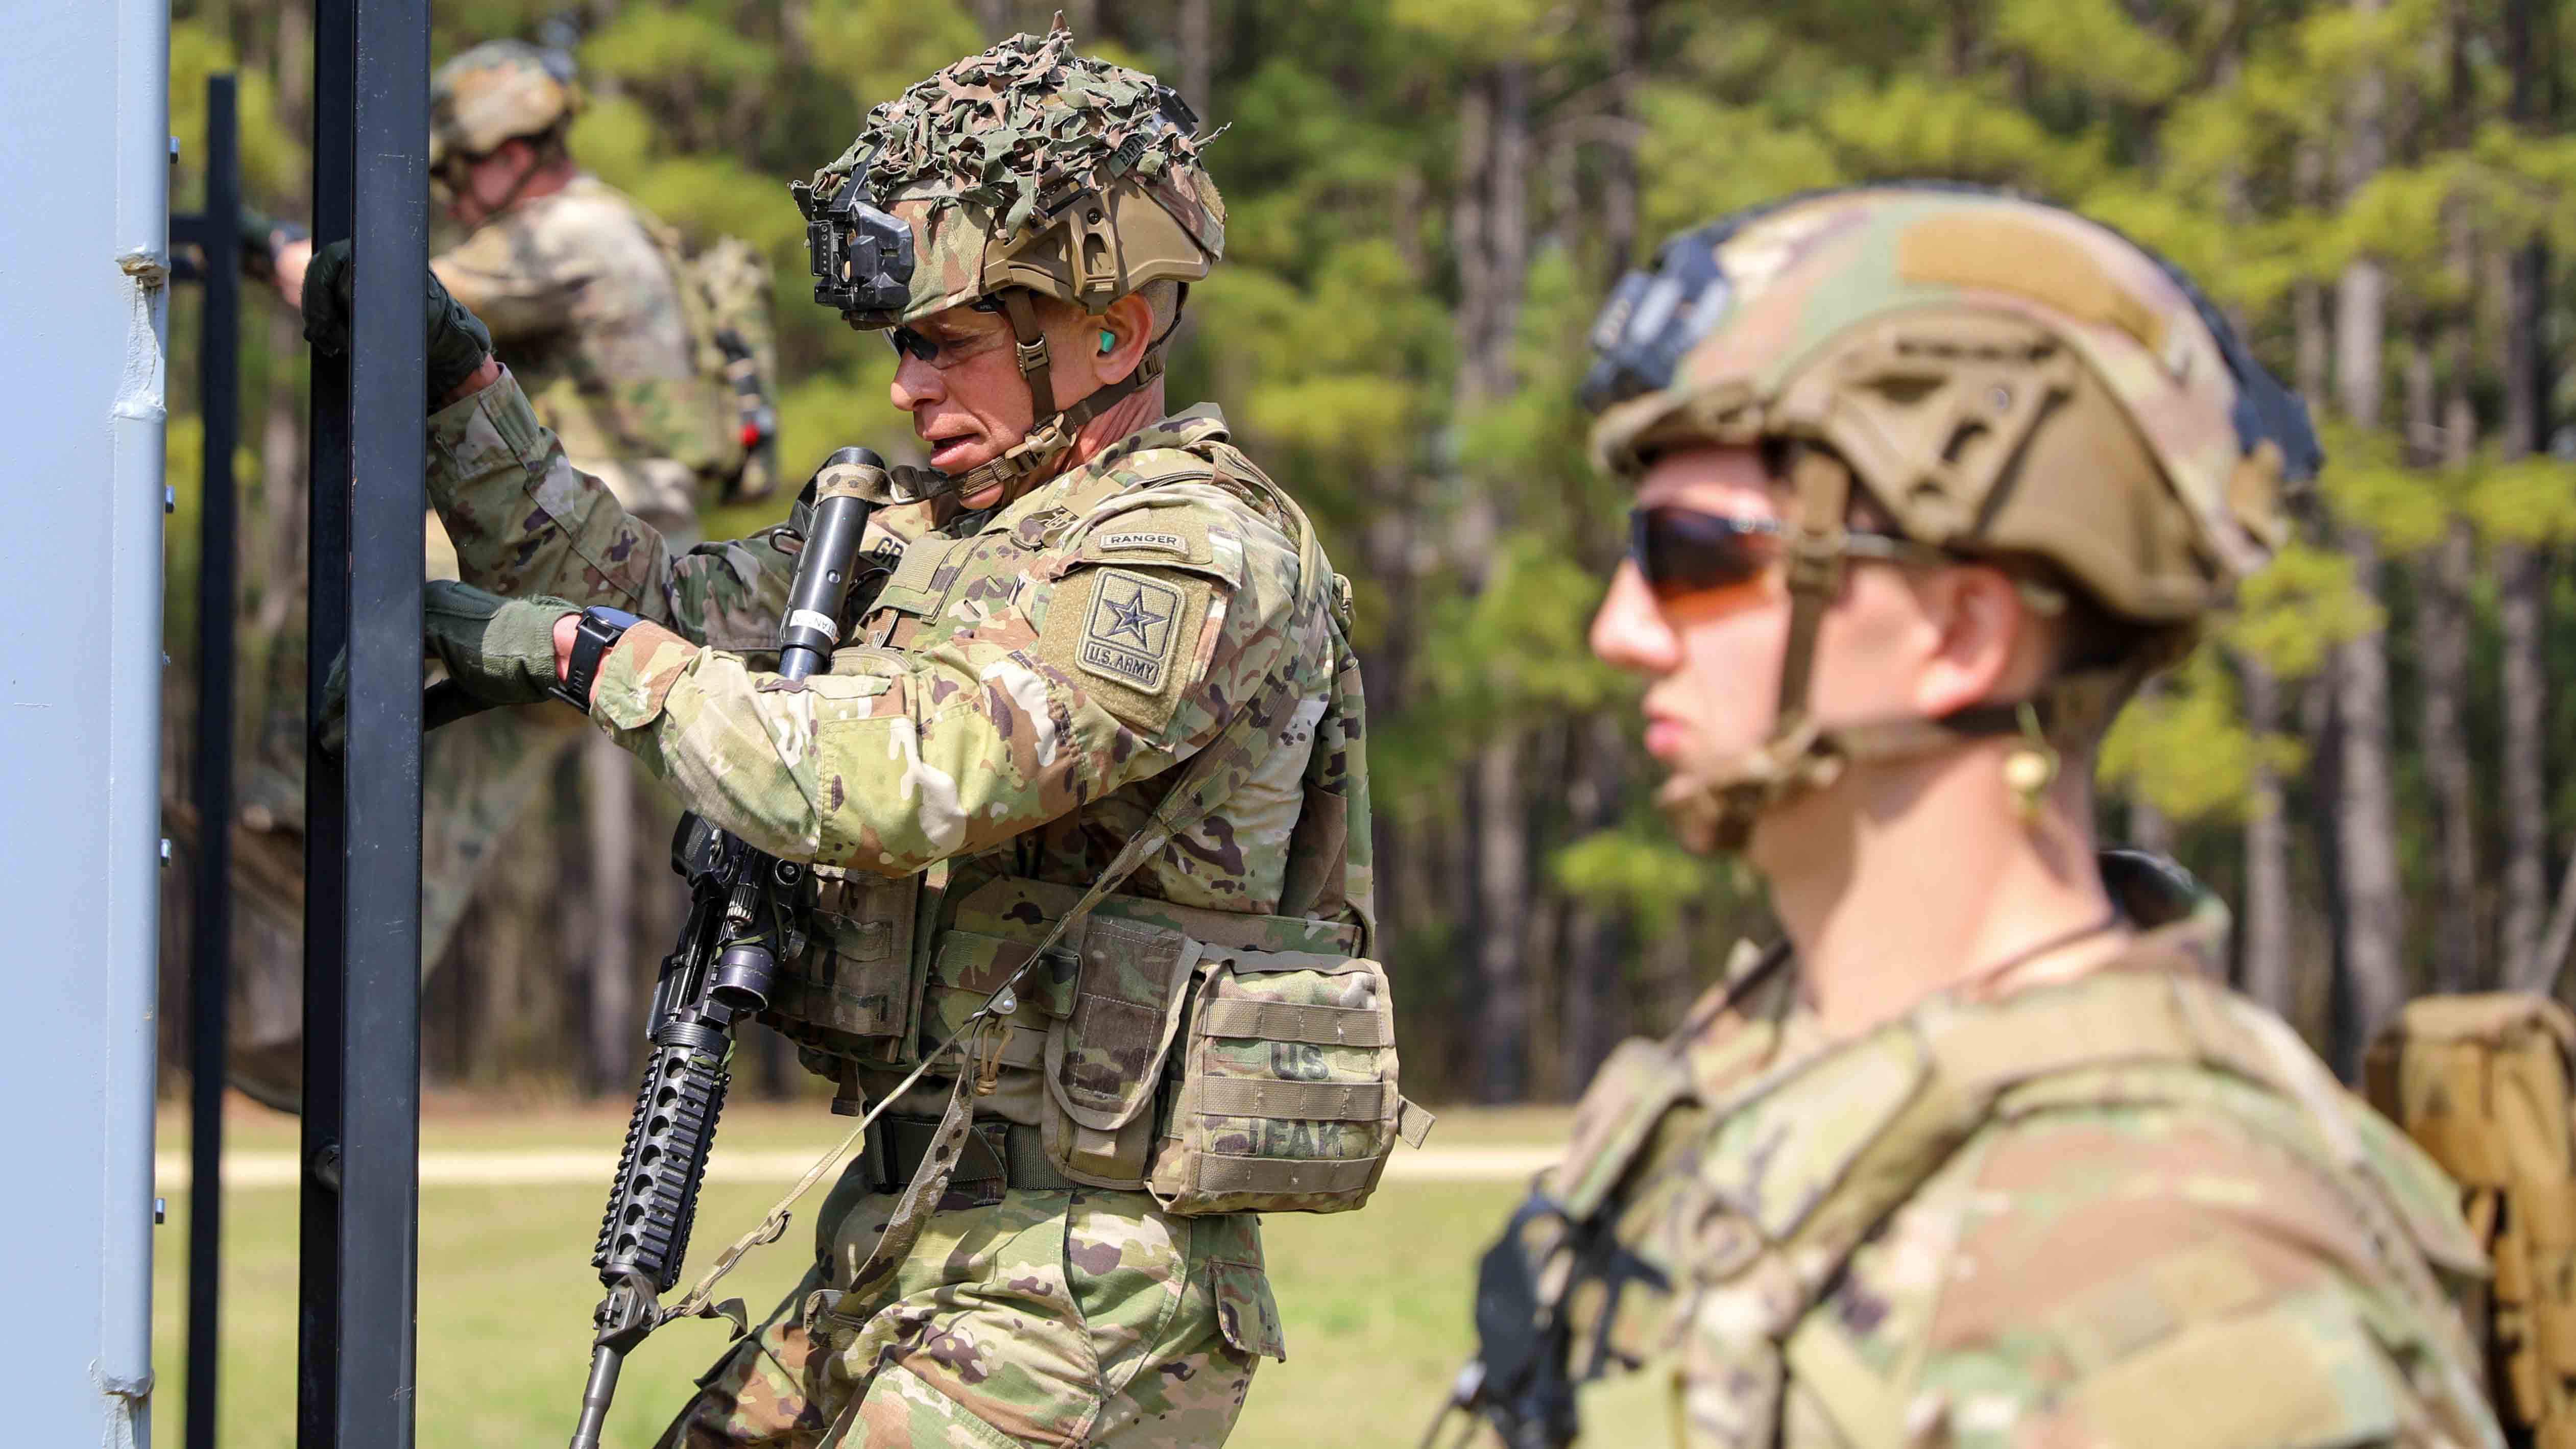 SMA Grinston training with soldiers